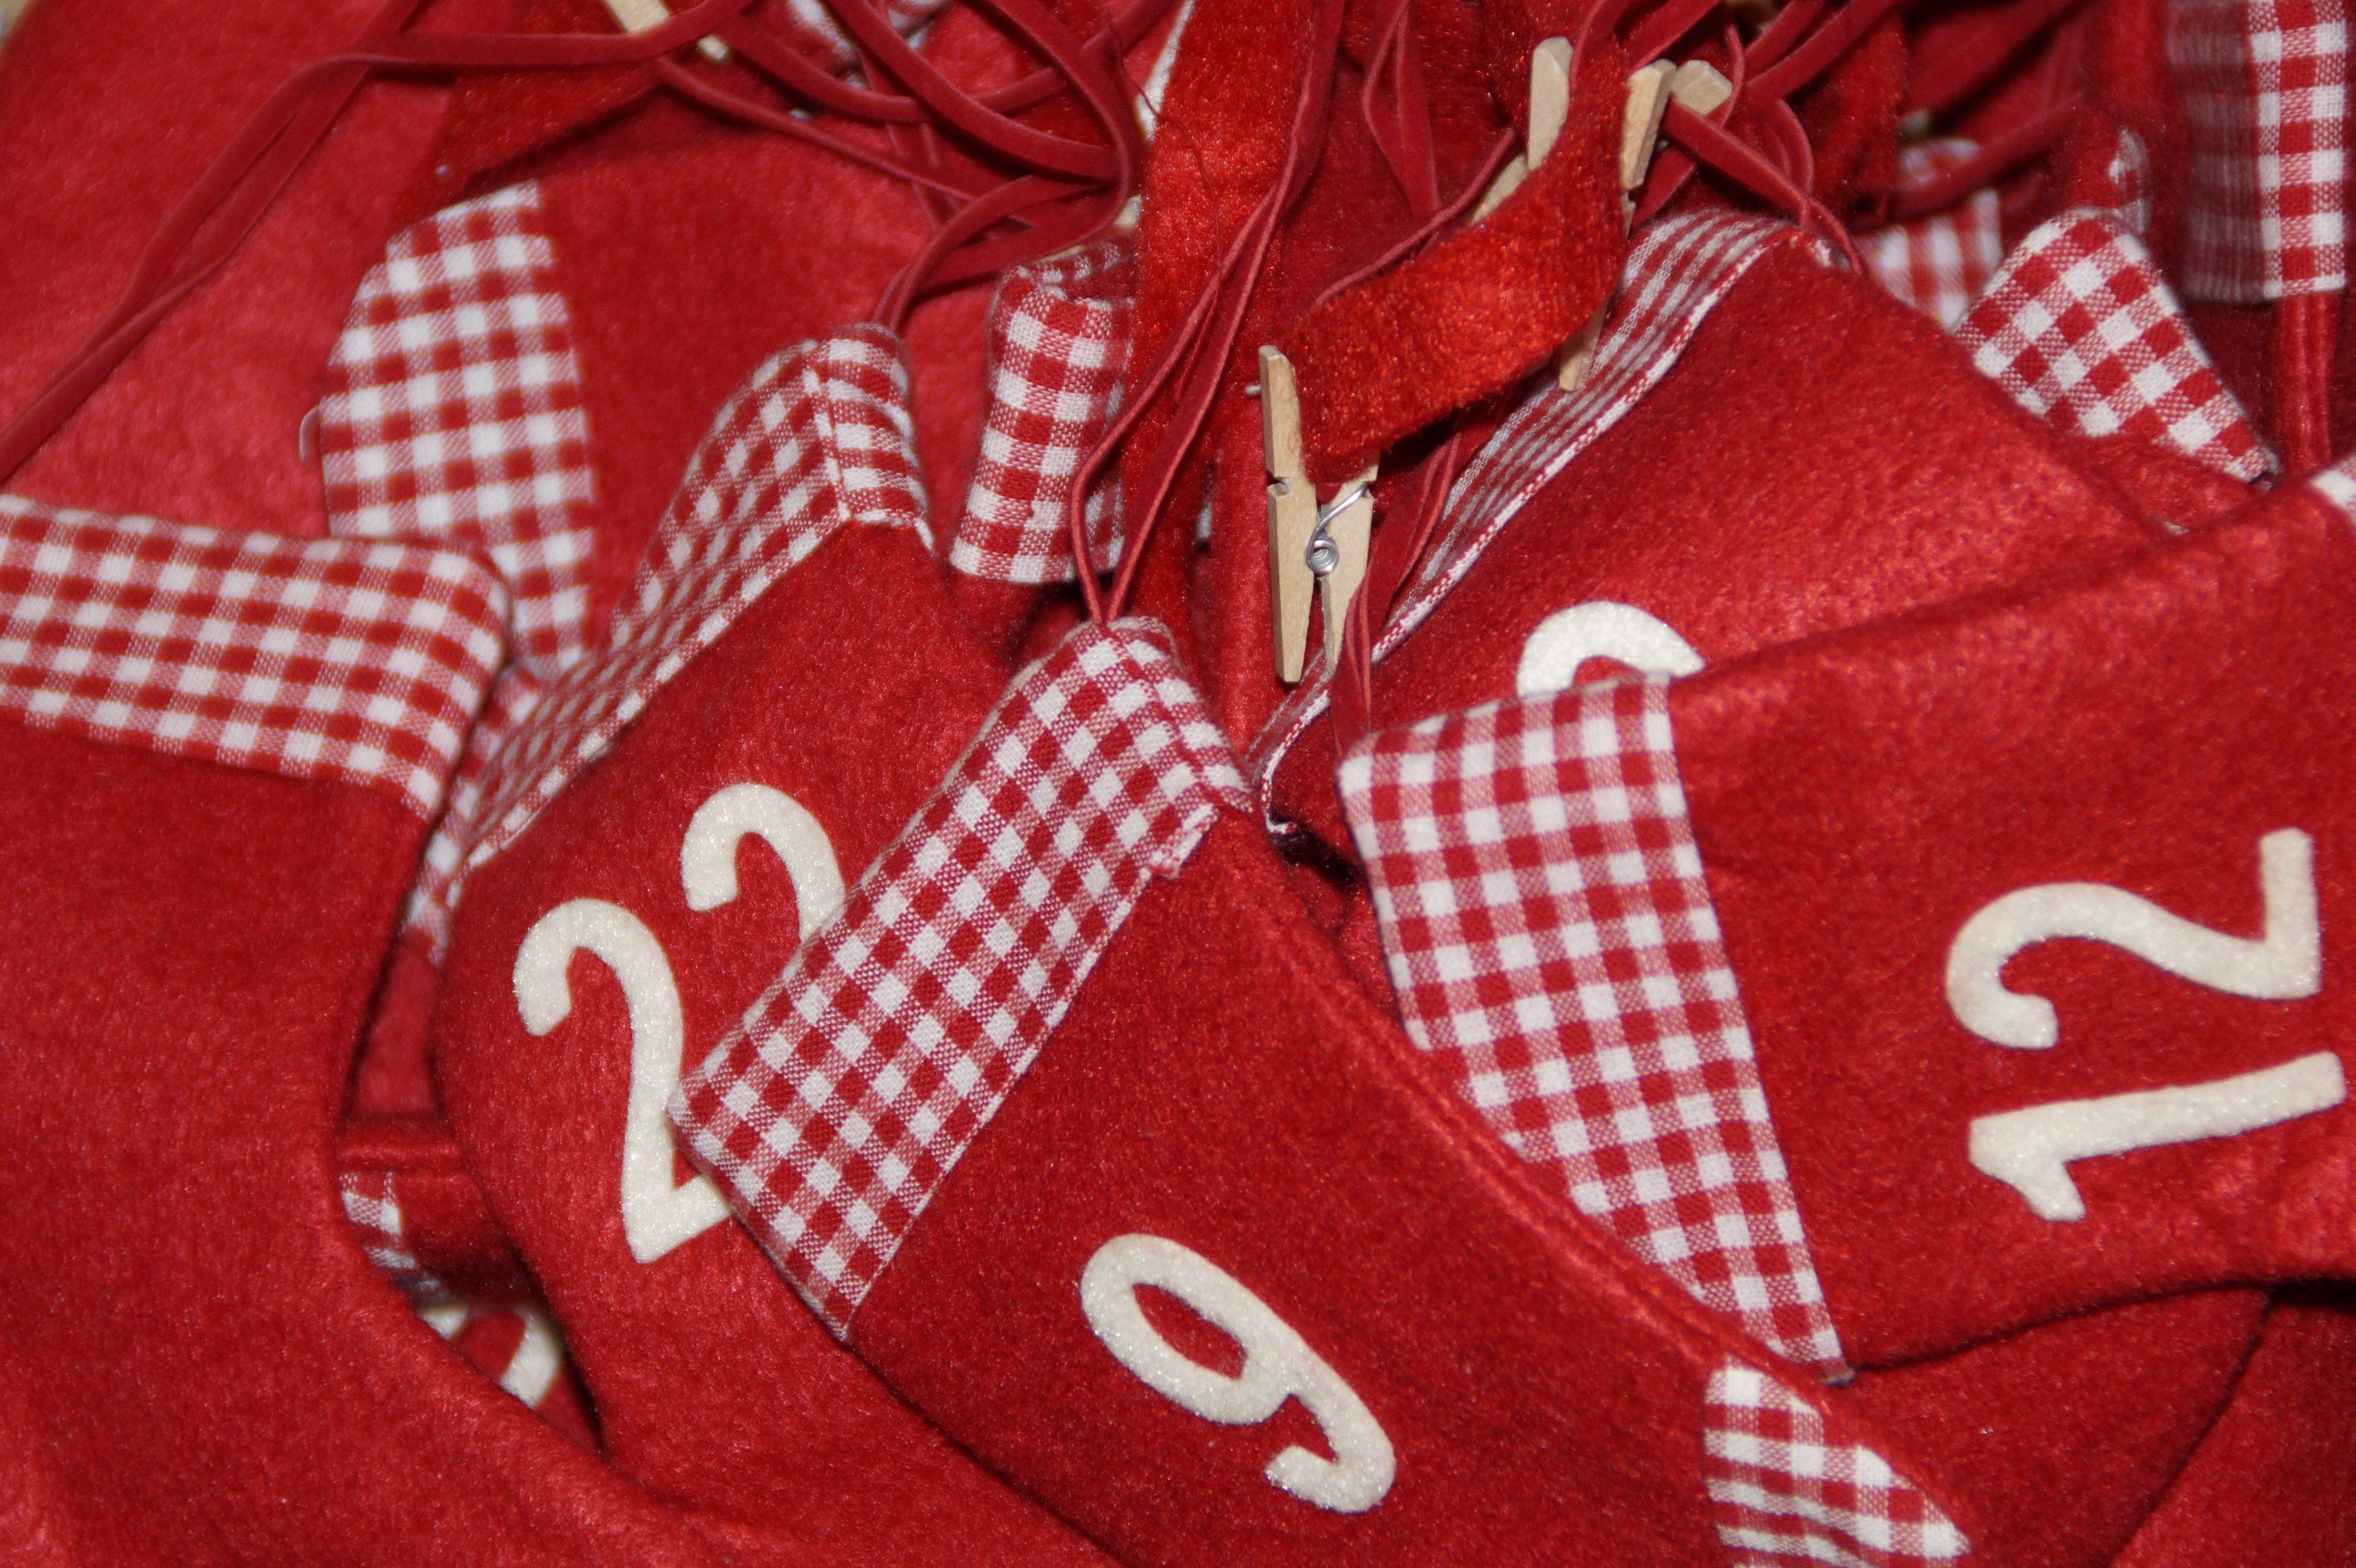 red and white textile with numbers